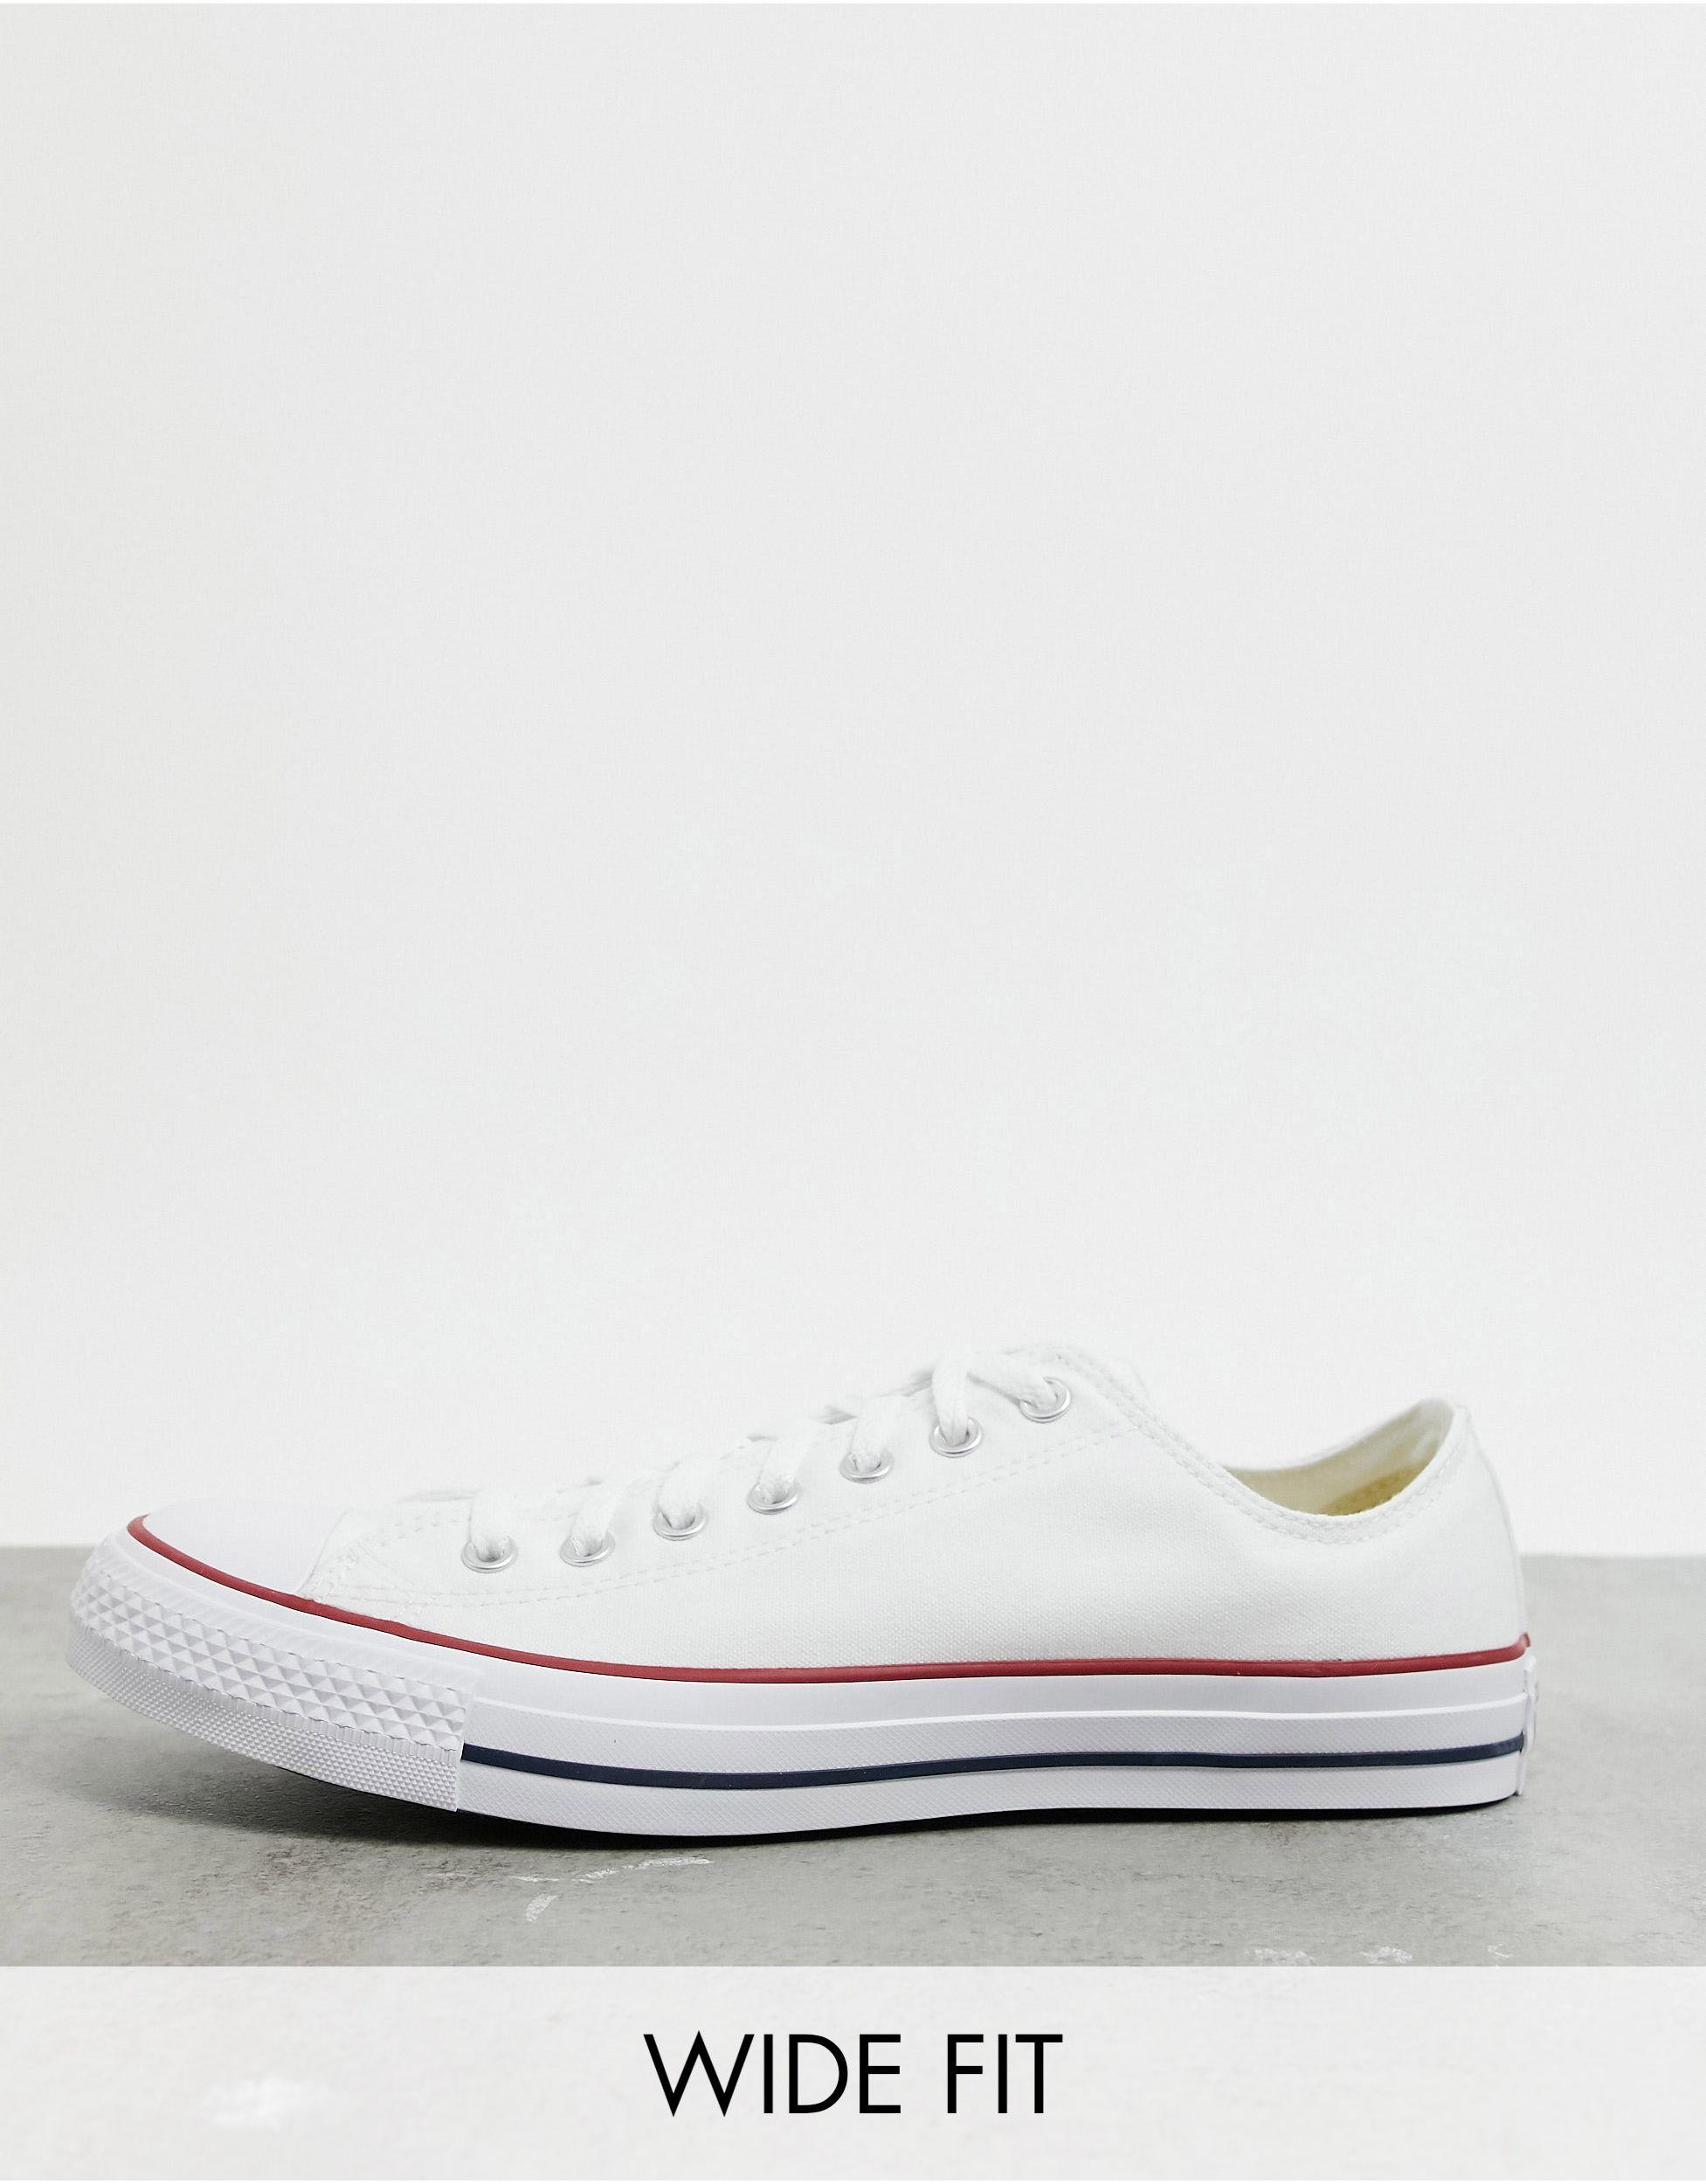 Converse Chuck Taylor Star Ox Trainers in White |